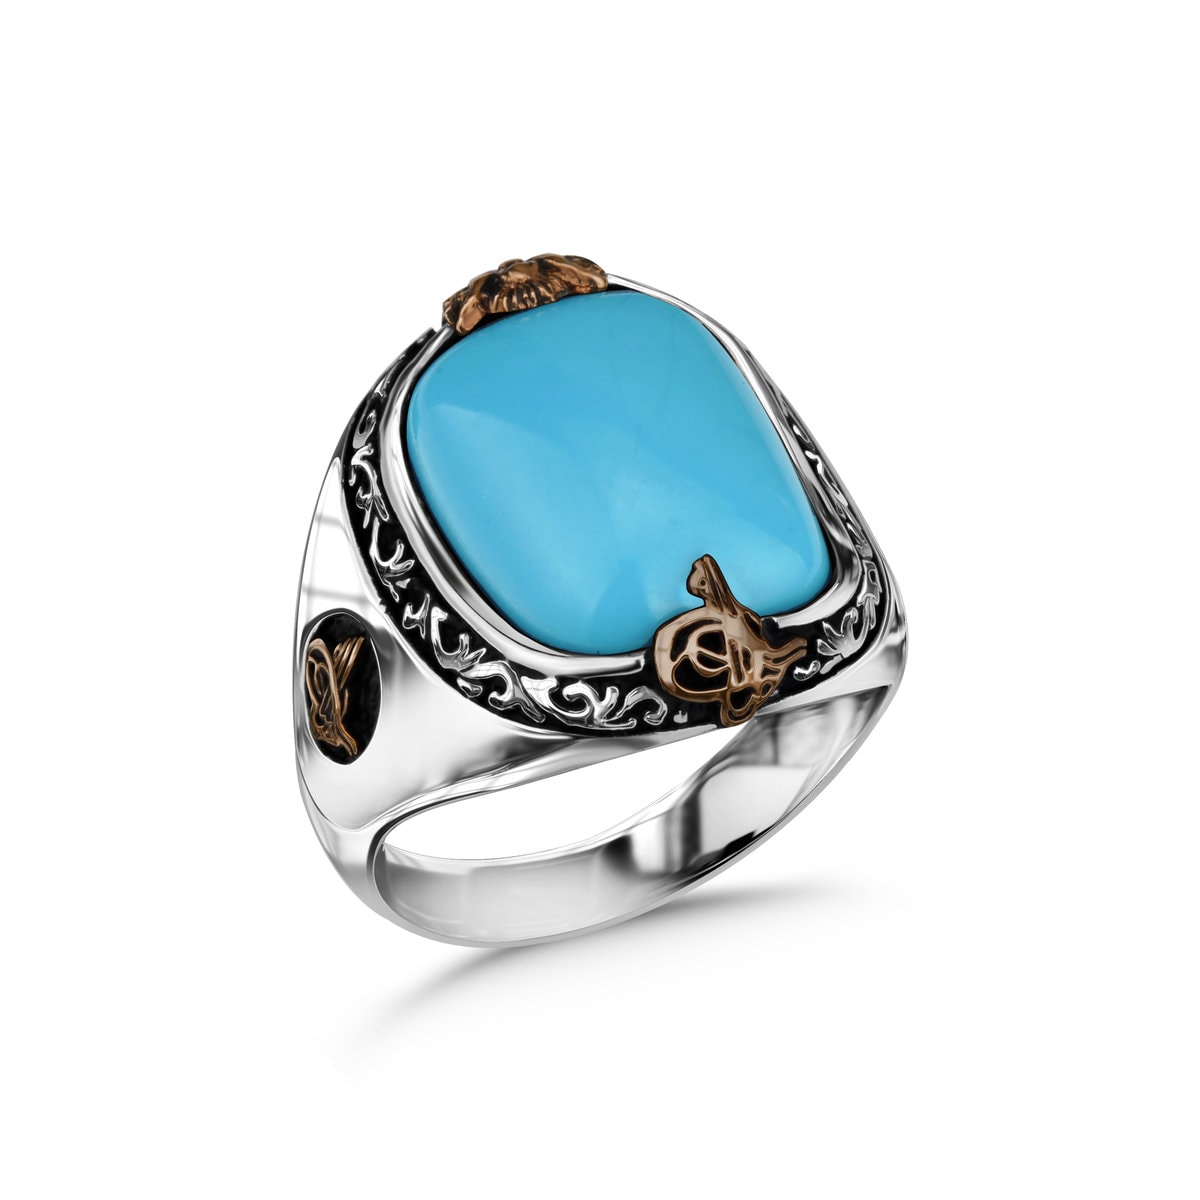 Turquoise Men's Silver Ring with Ottoman Tugra